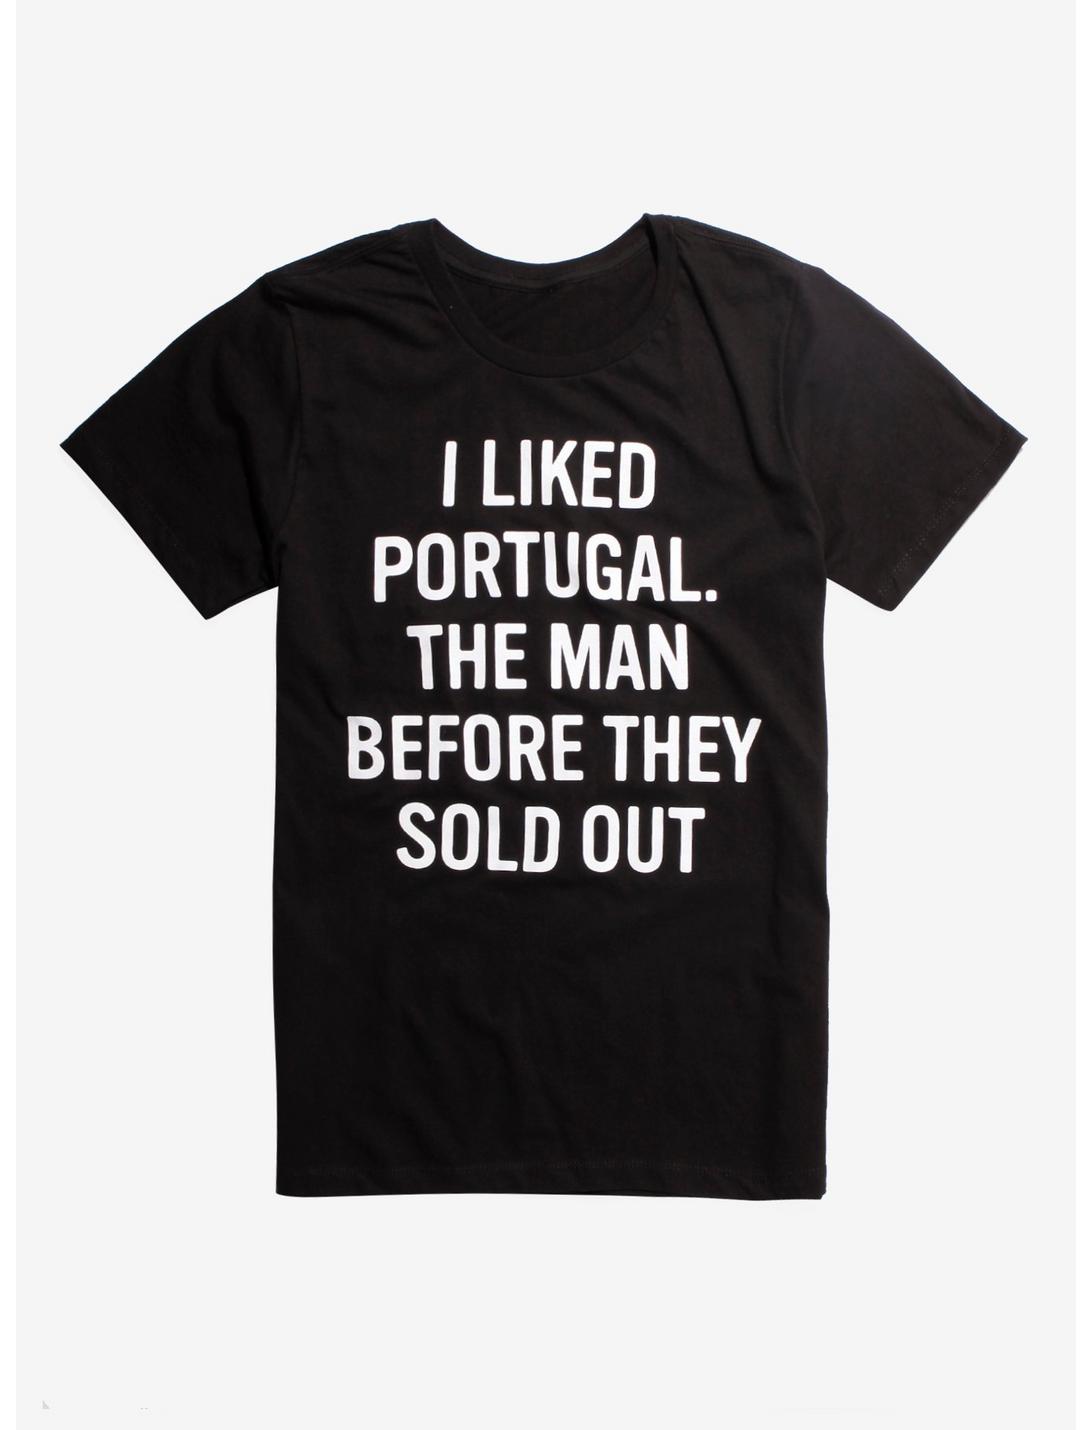 Portugal. The Man Sold Out T-Shirt, BLACK, hi-res